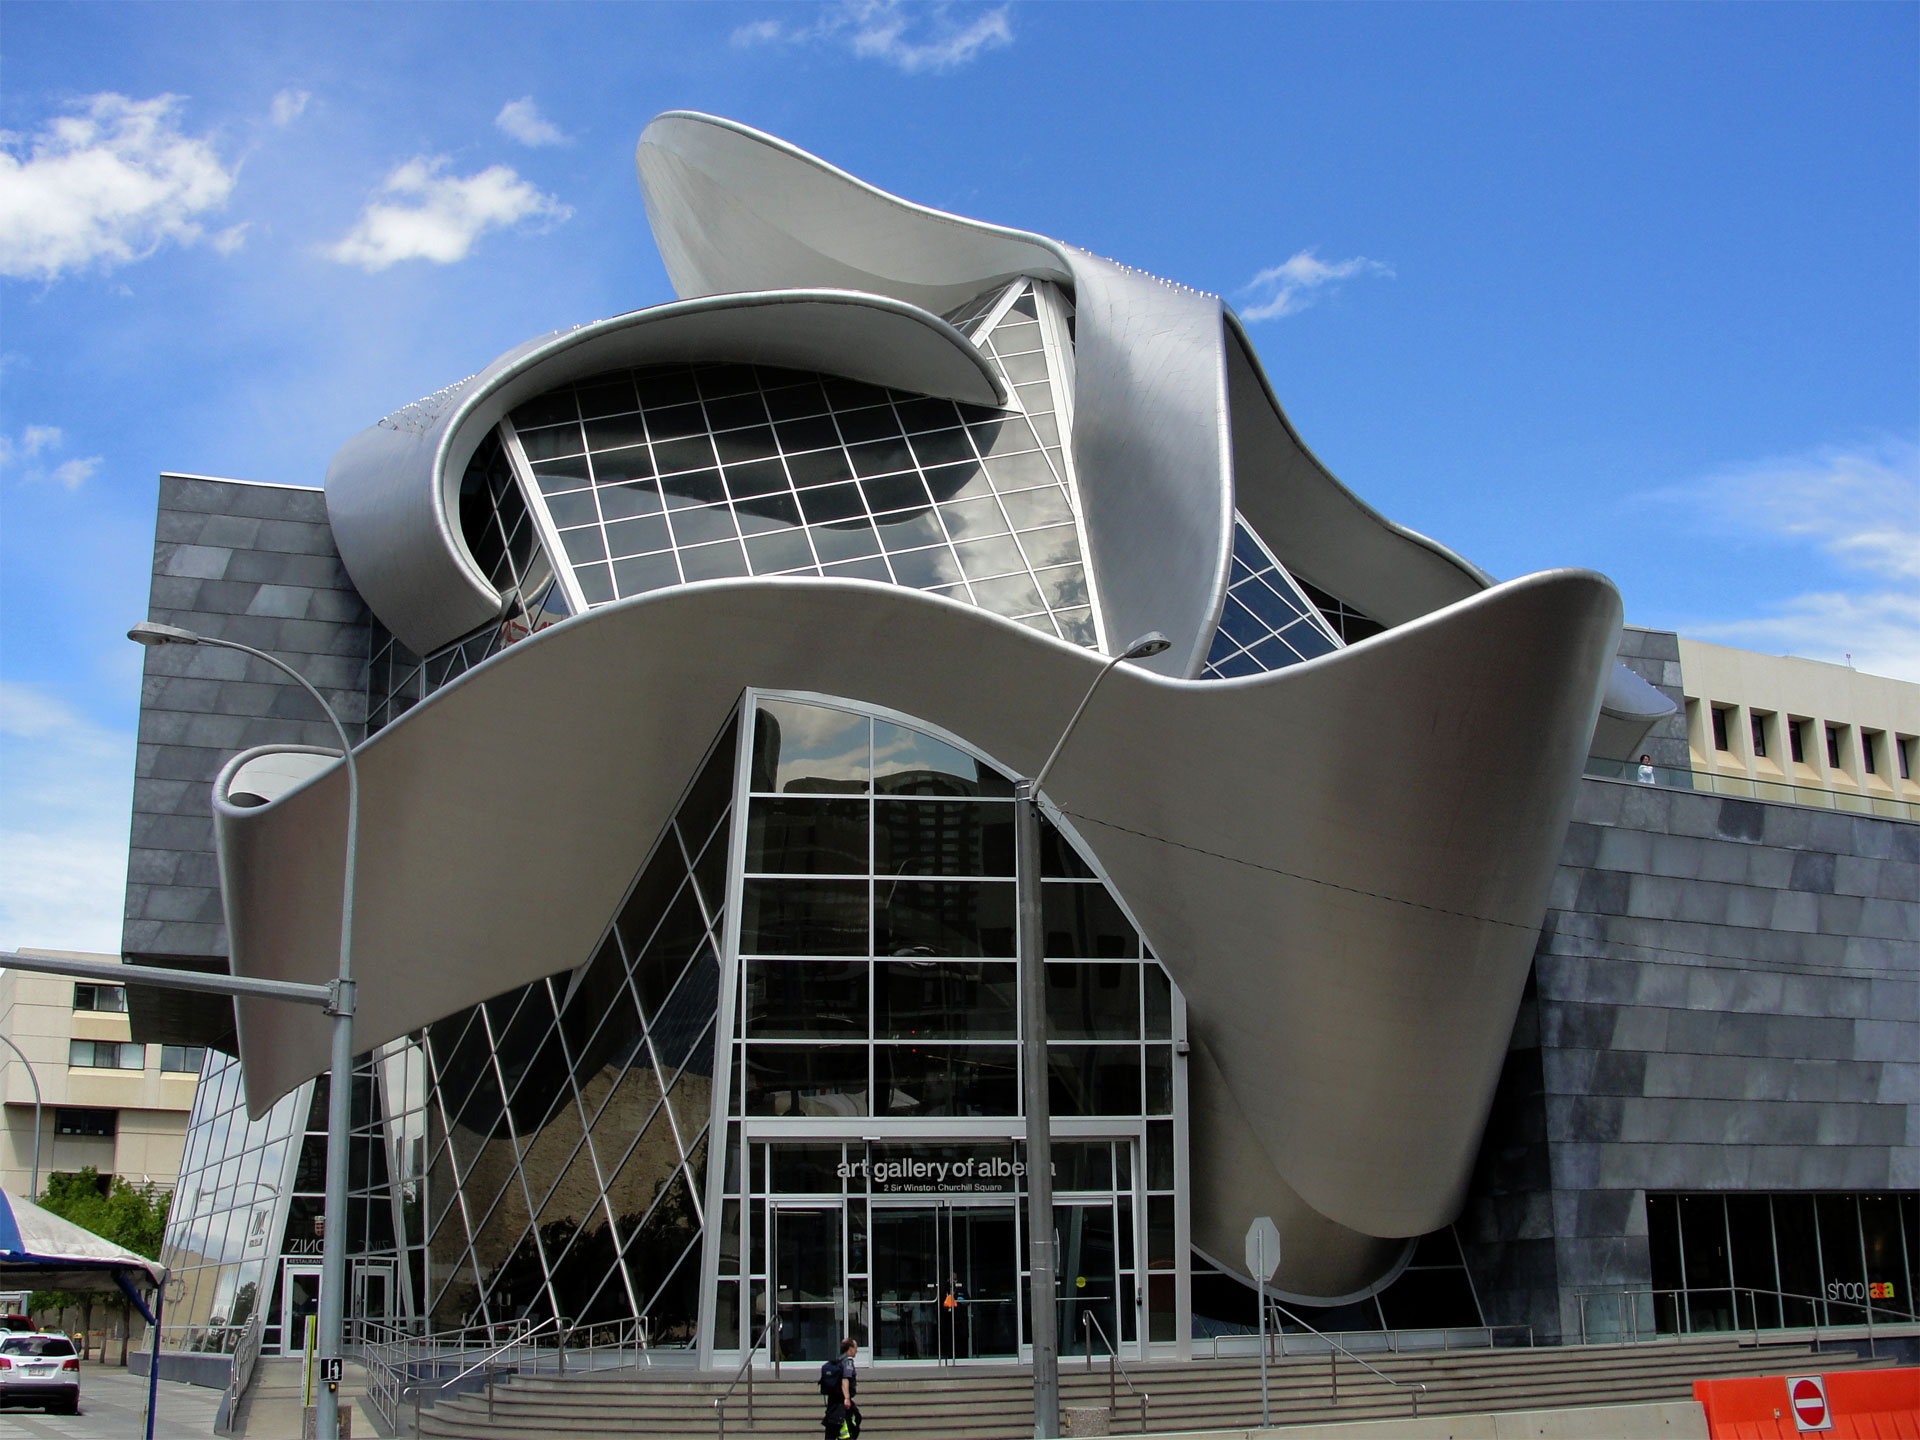 A modern art museum with a distinctive architectural design featuring metallic curves and glass elements under a blue sky with clouds